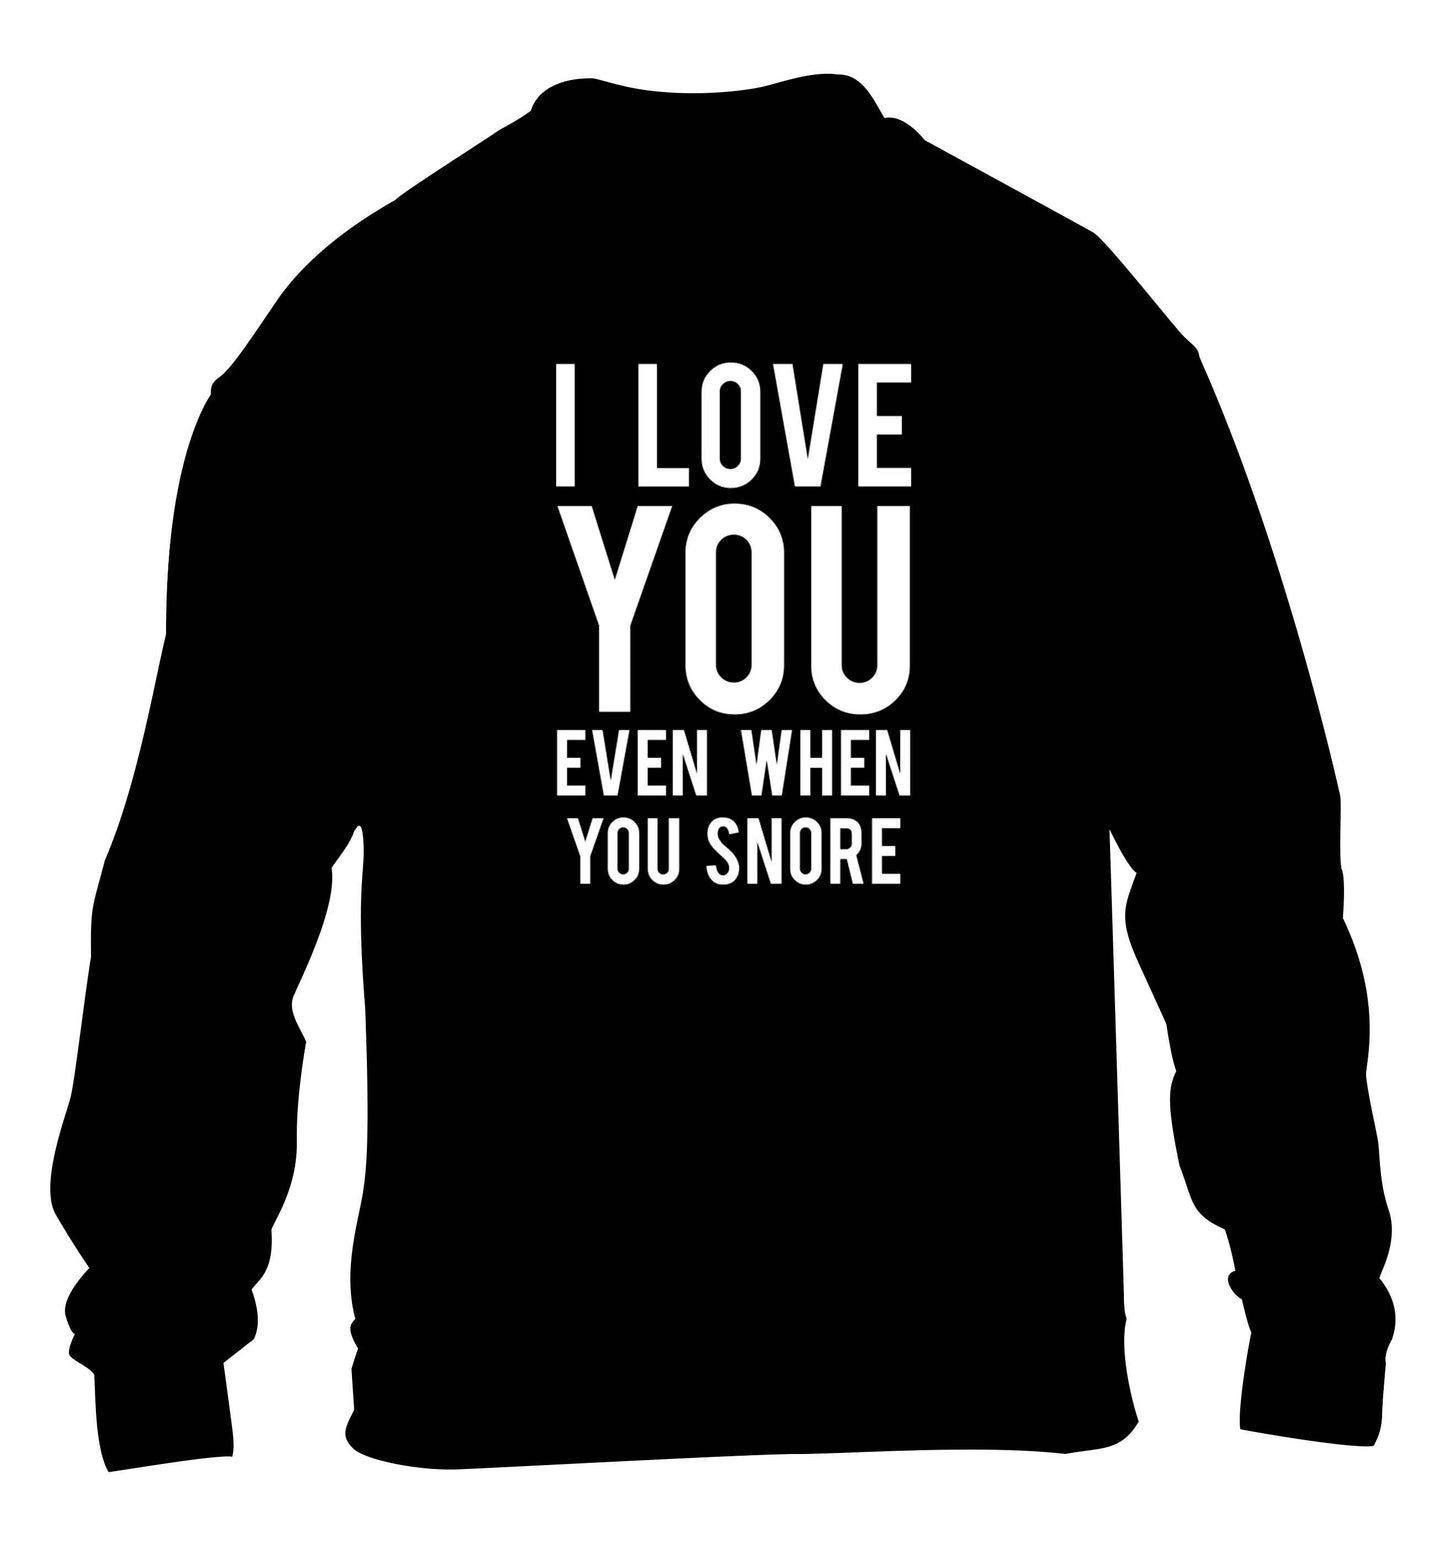 I love you even when you snore children's black sweater 12-13 Years